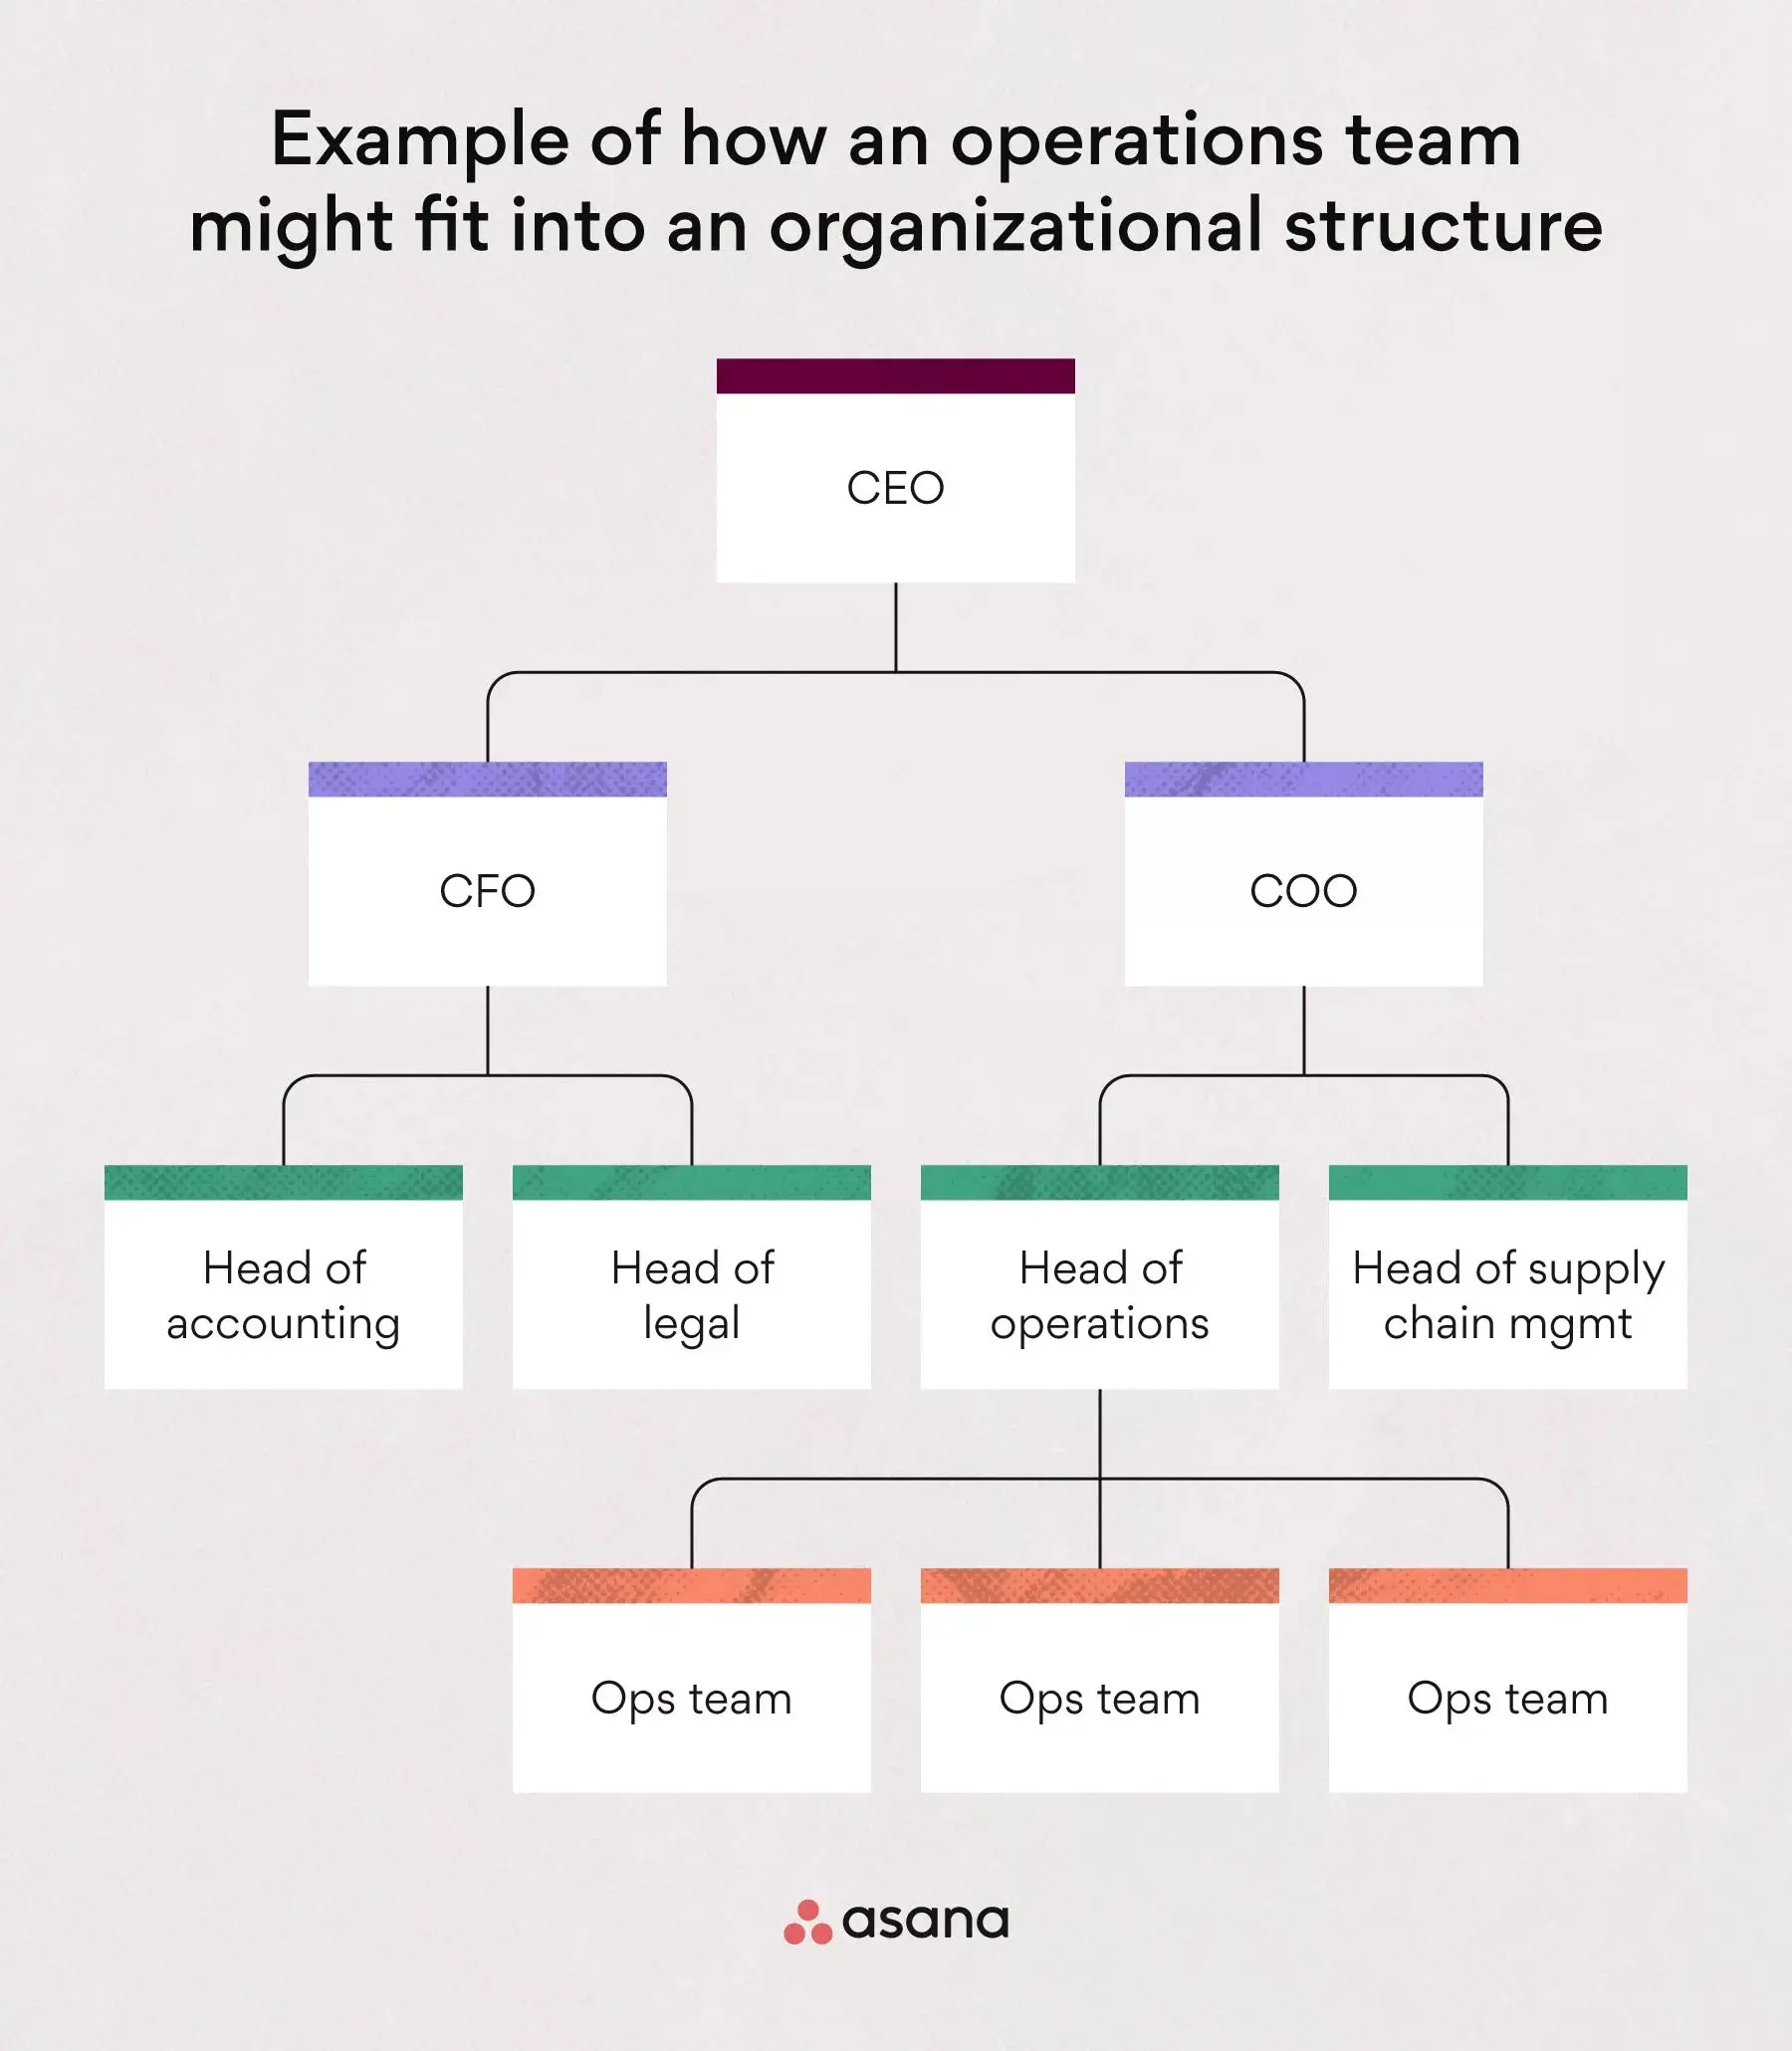 [inline illustration] how an operations team might fit into an organizational structure (example)